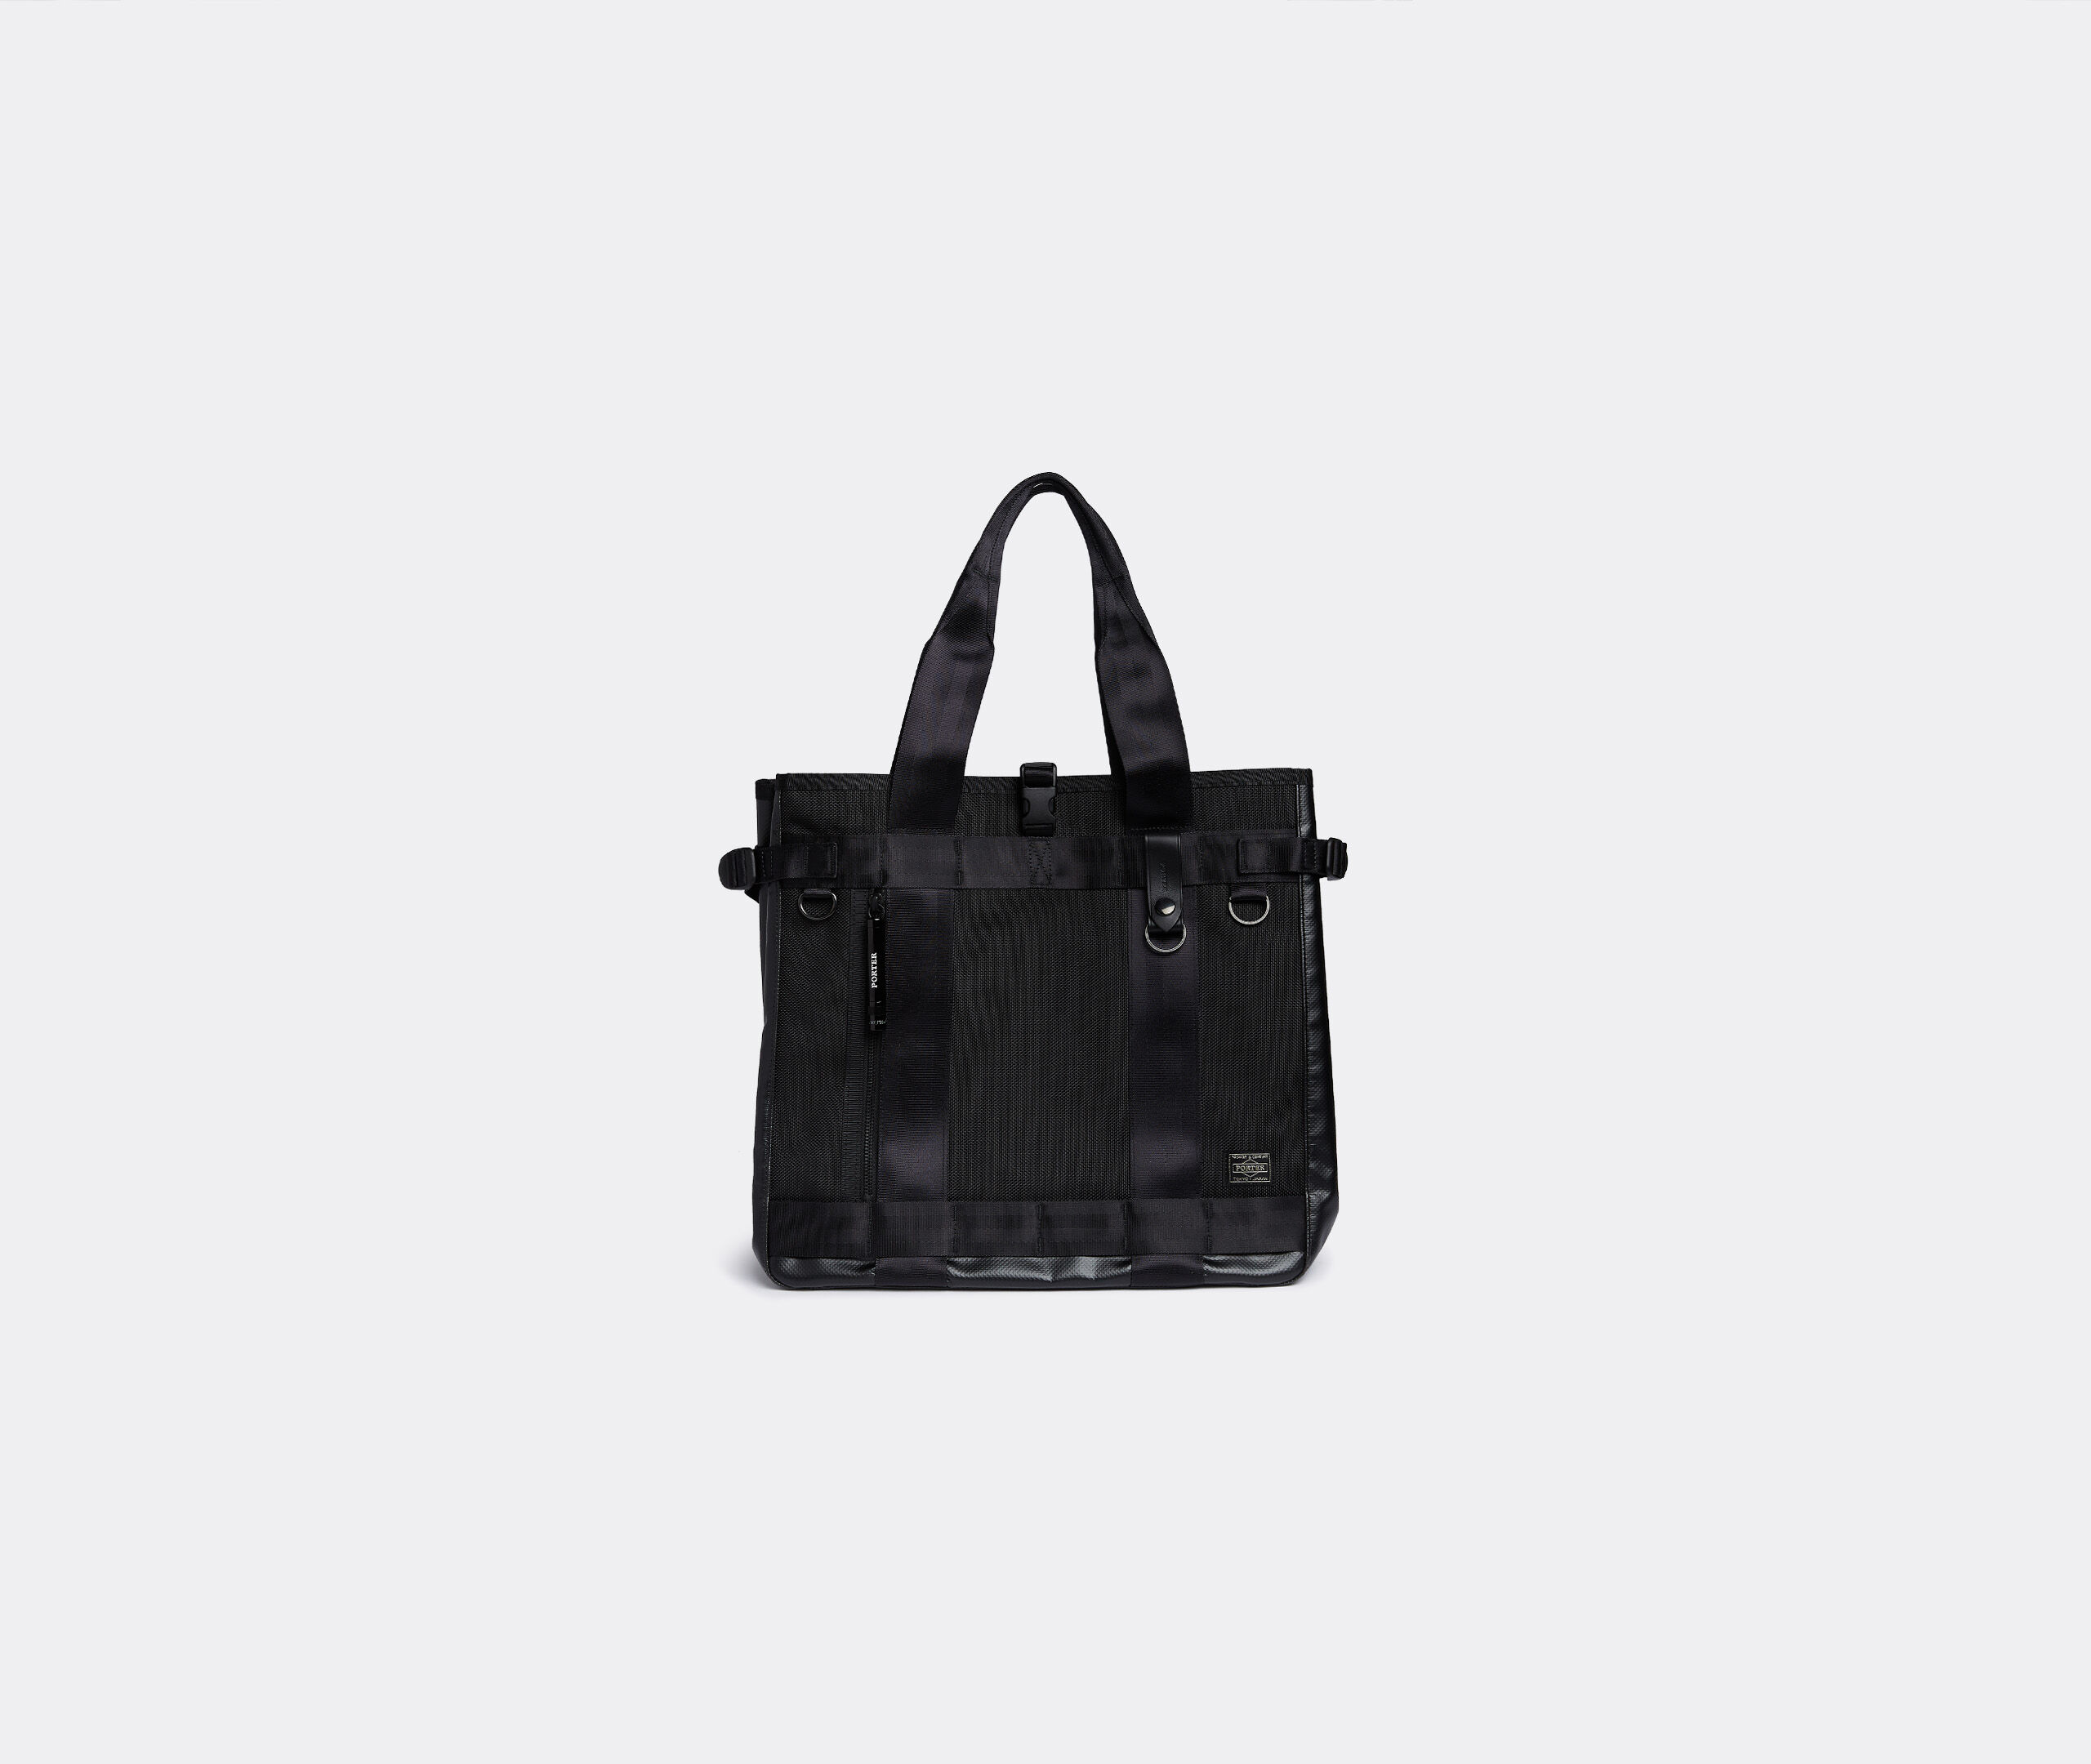 'Heat' tote bag, black by Porter - Yoshida & Co. | Bags And